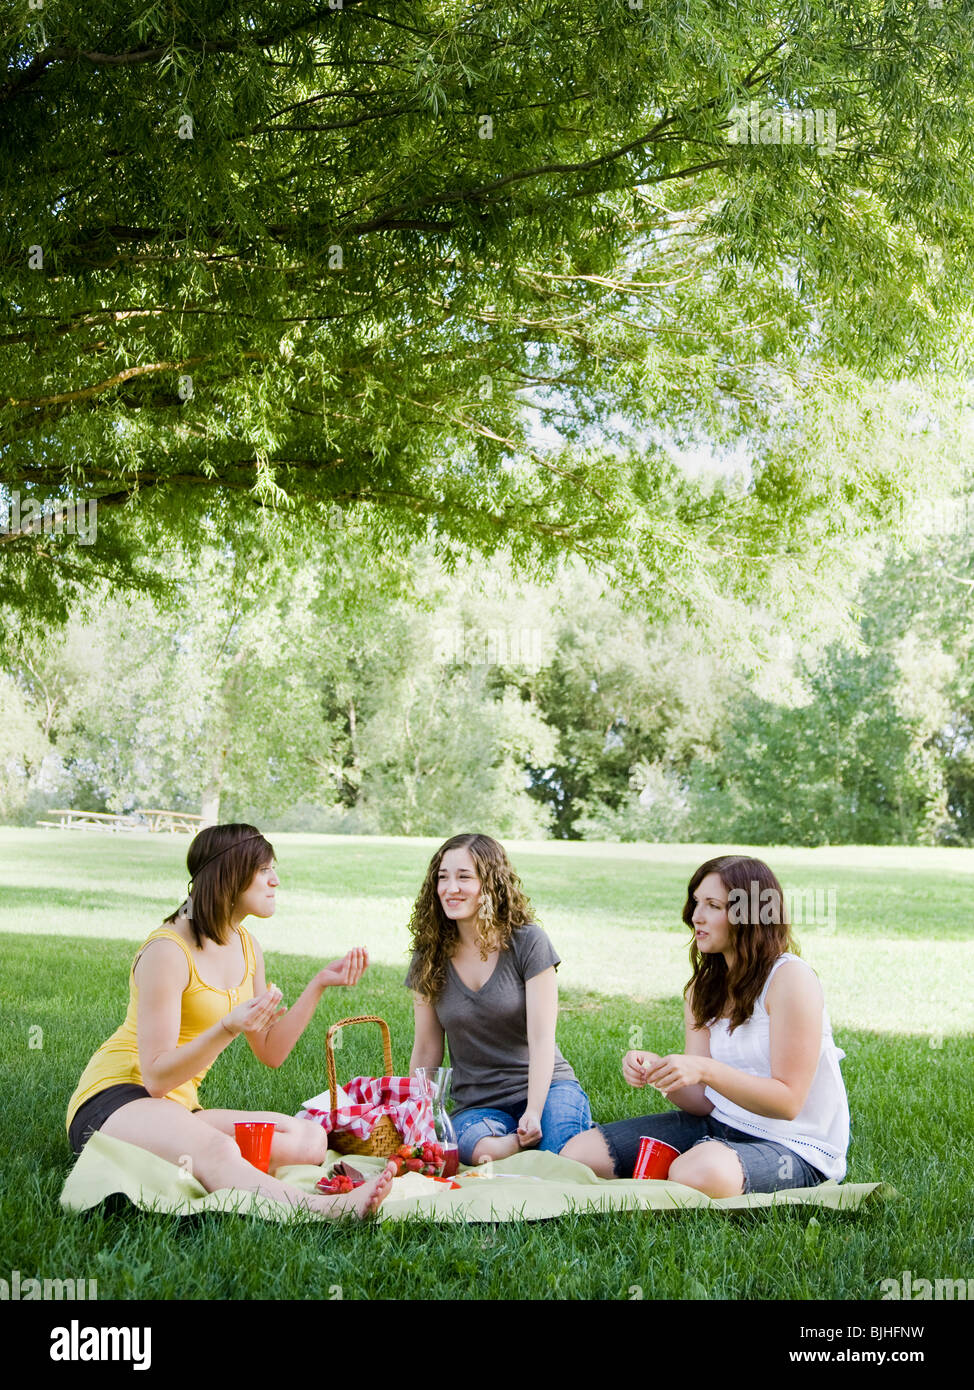 three young women having a picnic on the grass in a park Stock Photo